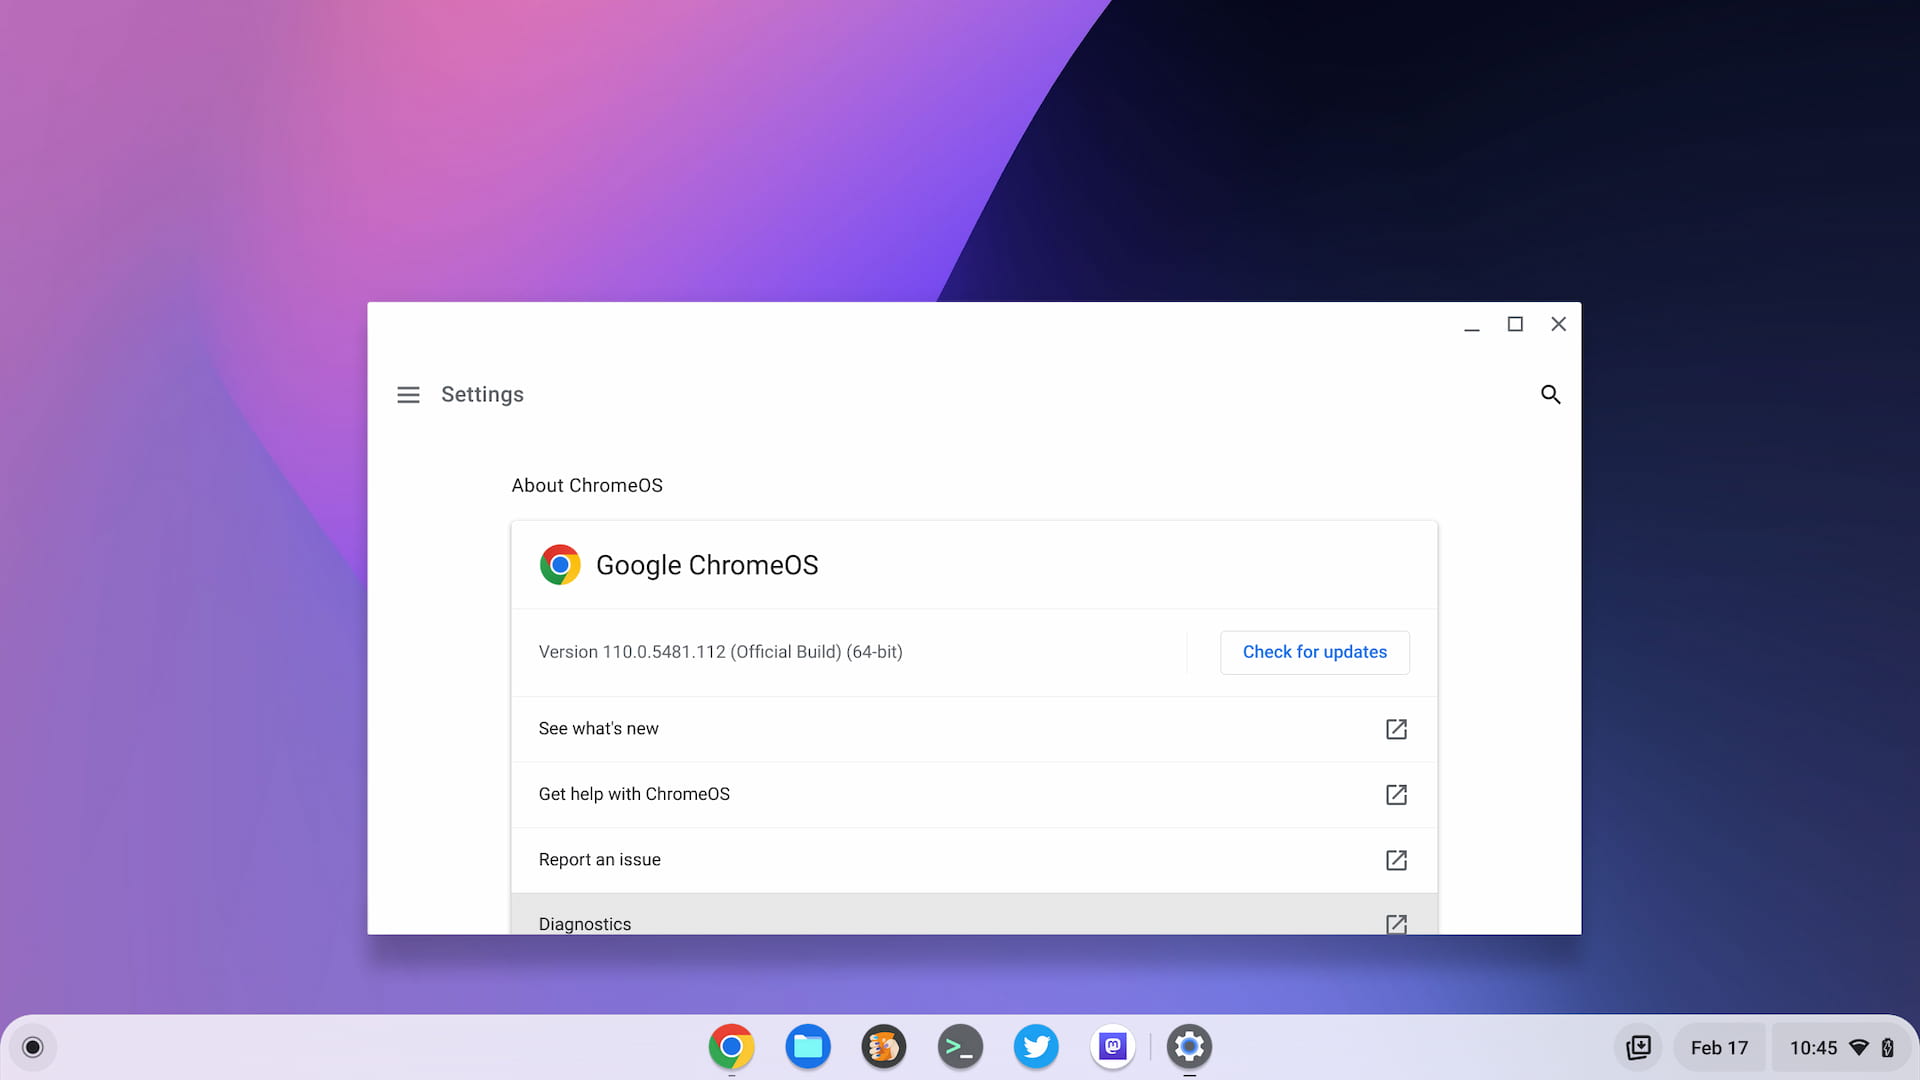 ChromeOS 110 release showing in Chromebook settings